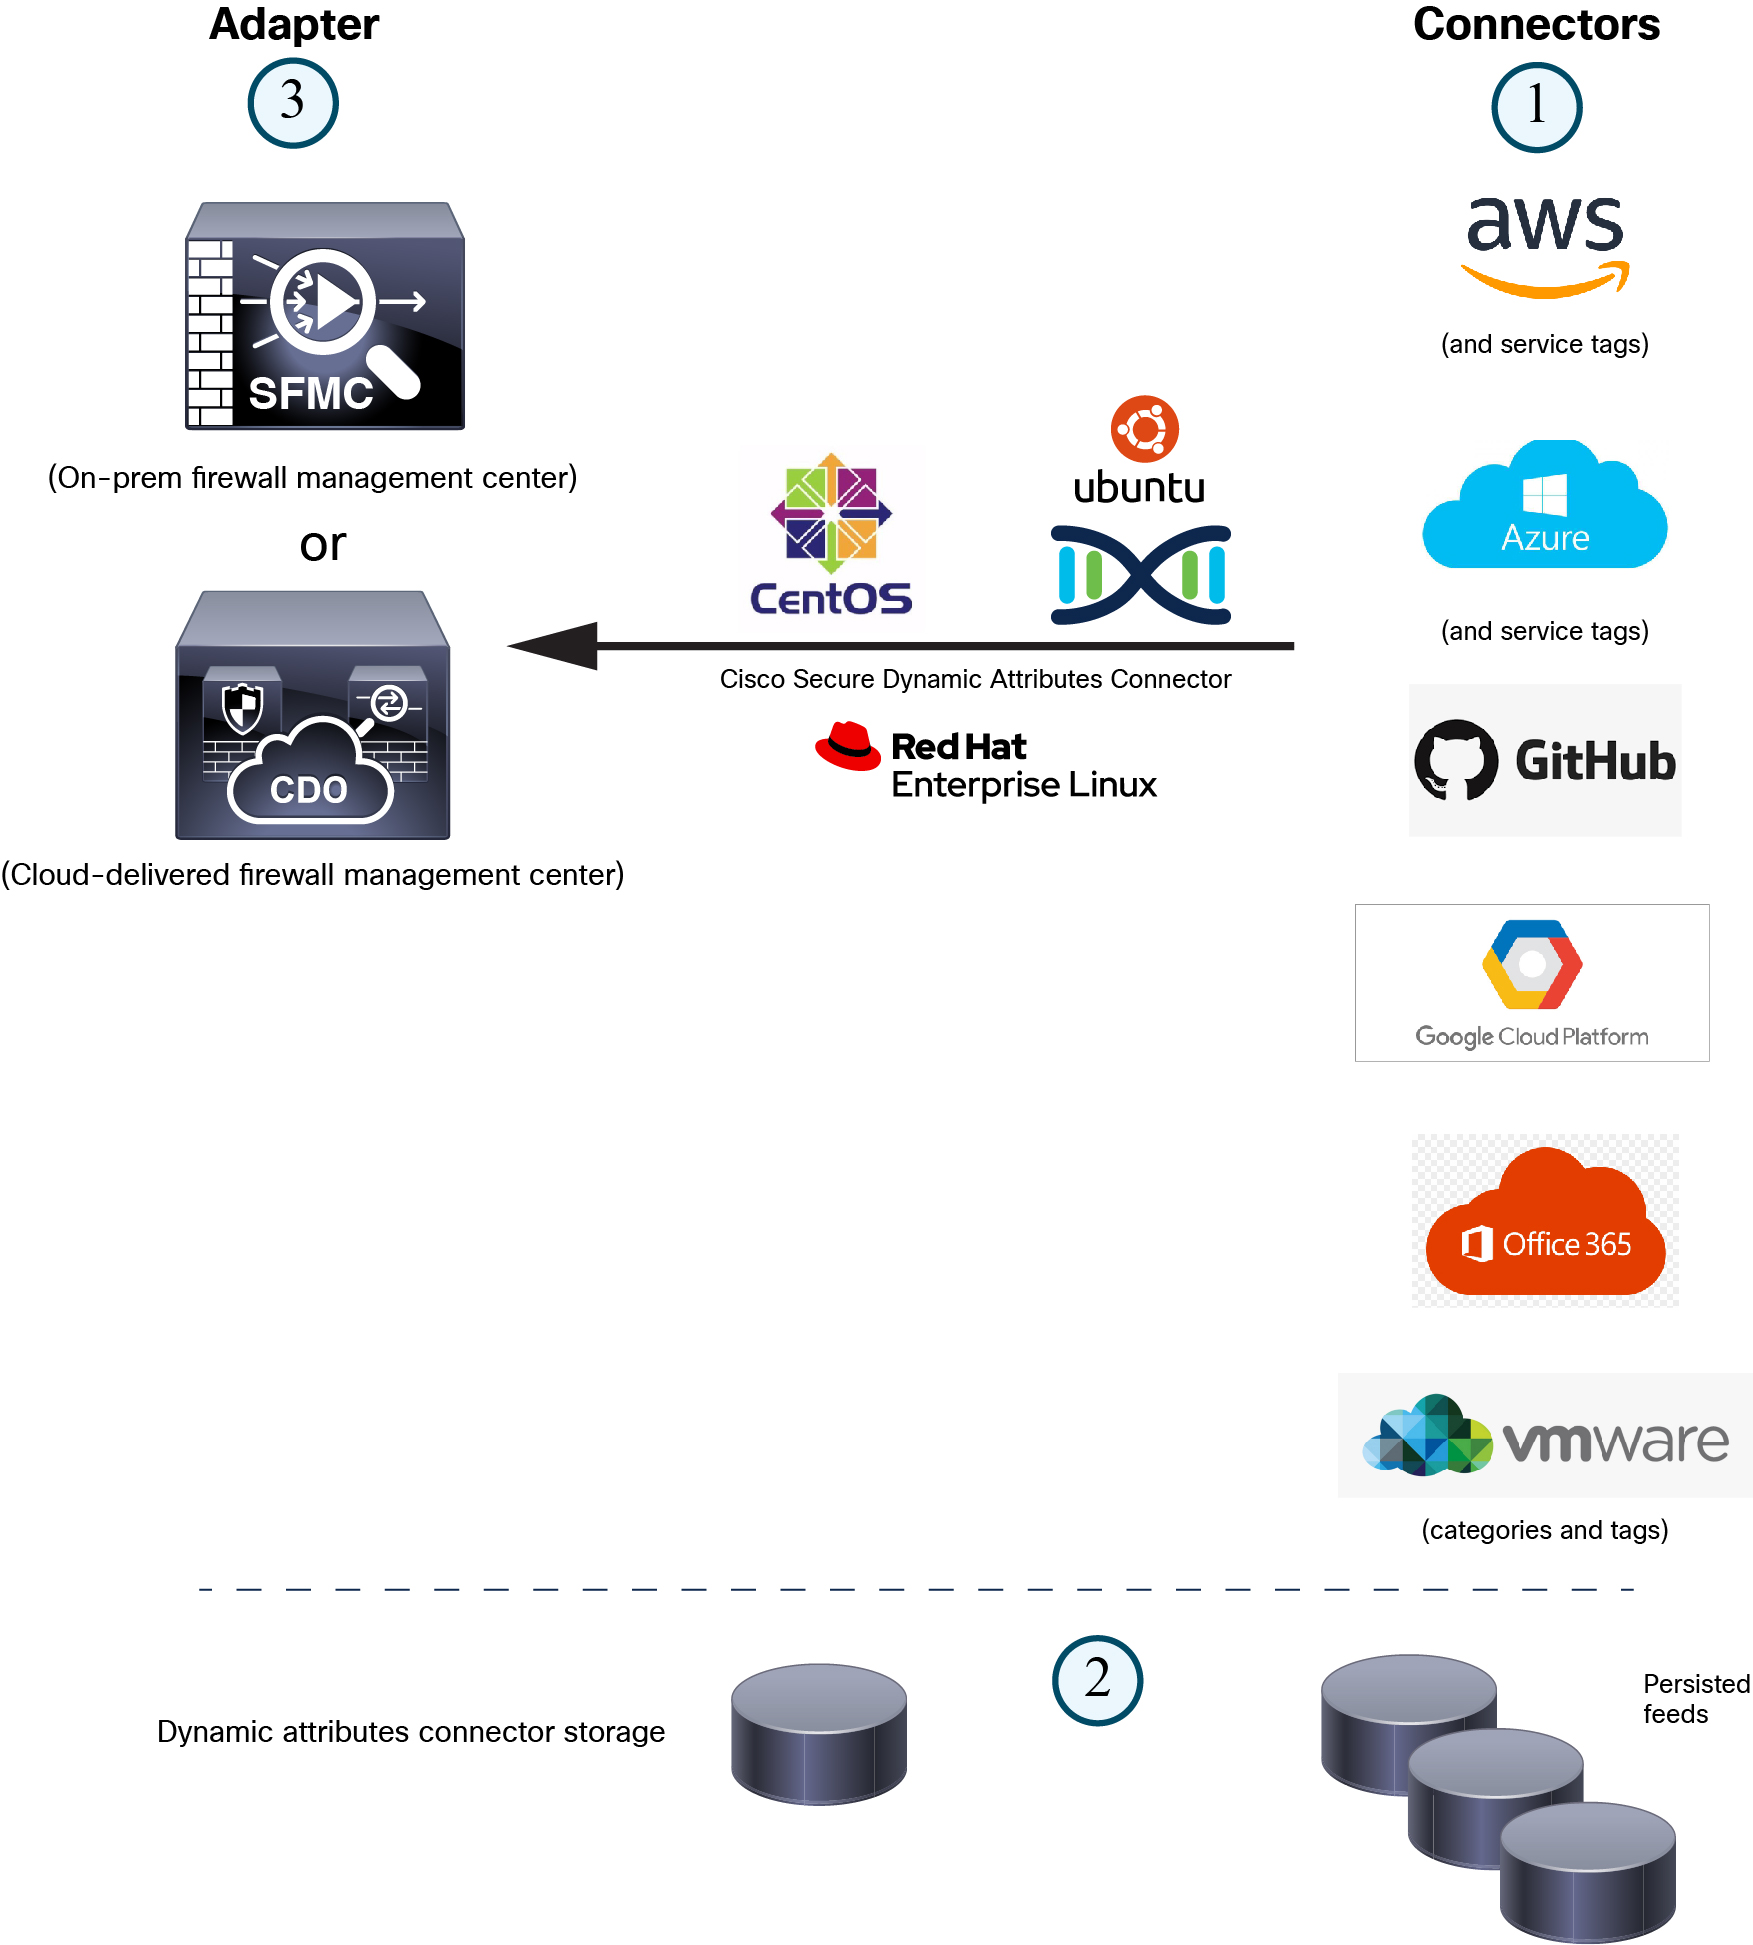 "The Cisco Secure Dynamic Attributes Connector queries cloud services such as VMware vCenter and provides information such as VLANs, networks, and tags to the secure management center to use as selection criteria in access control rules. This way, you don't have to constantly update network objects when IP address information (for example) in your cloud systems change"